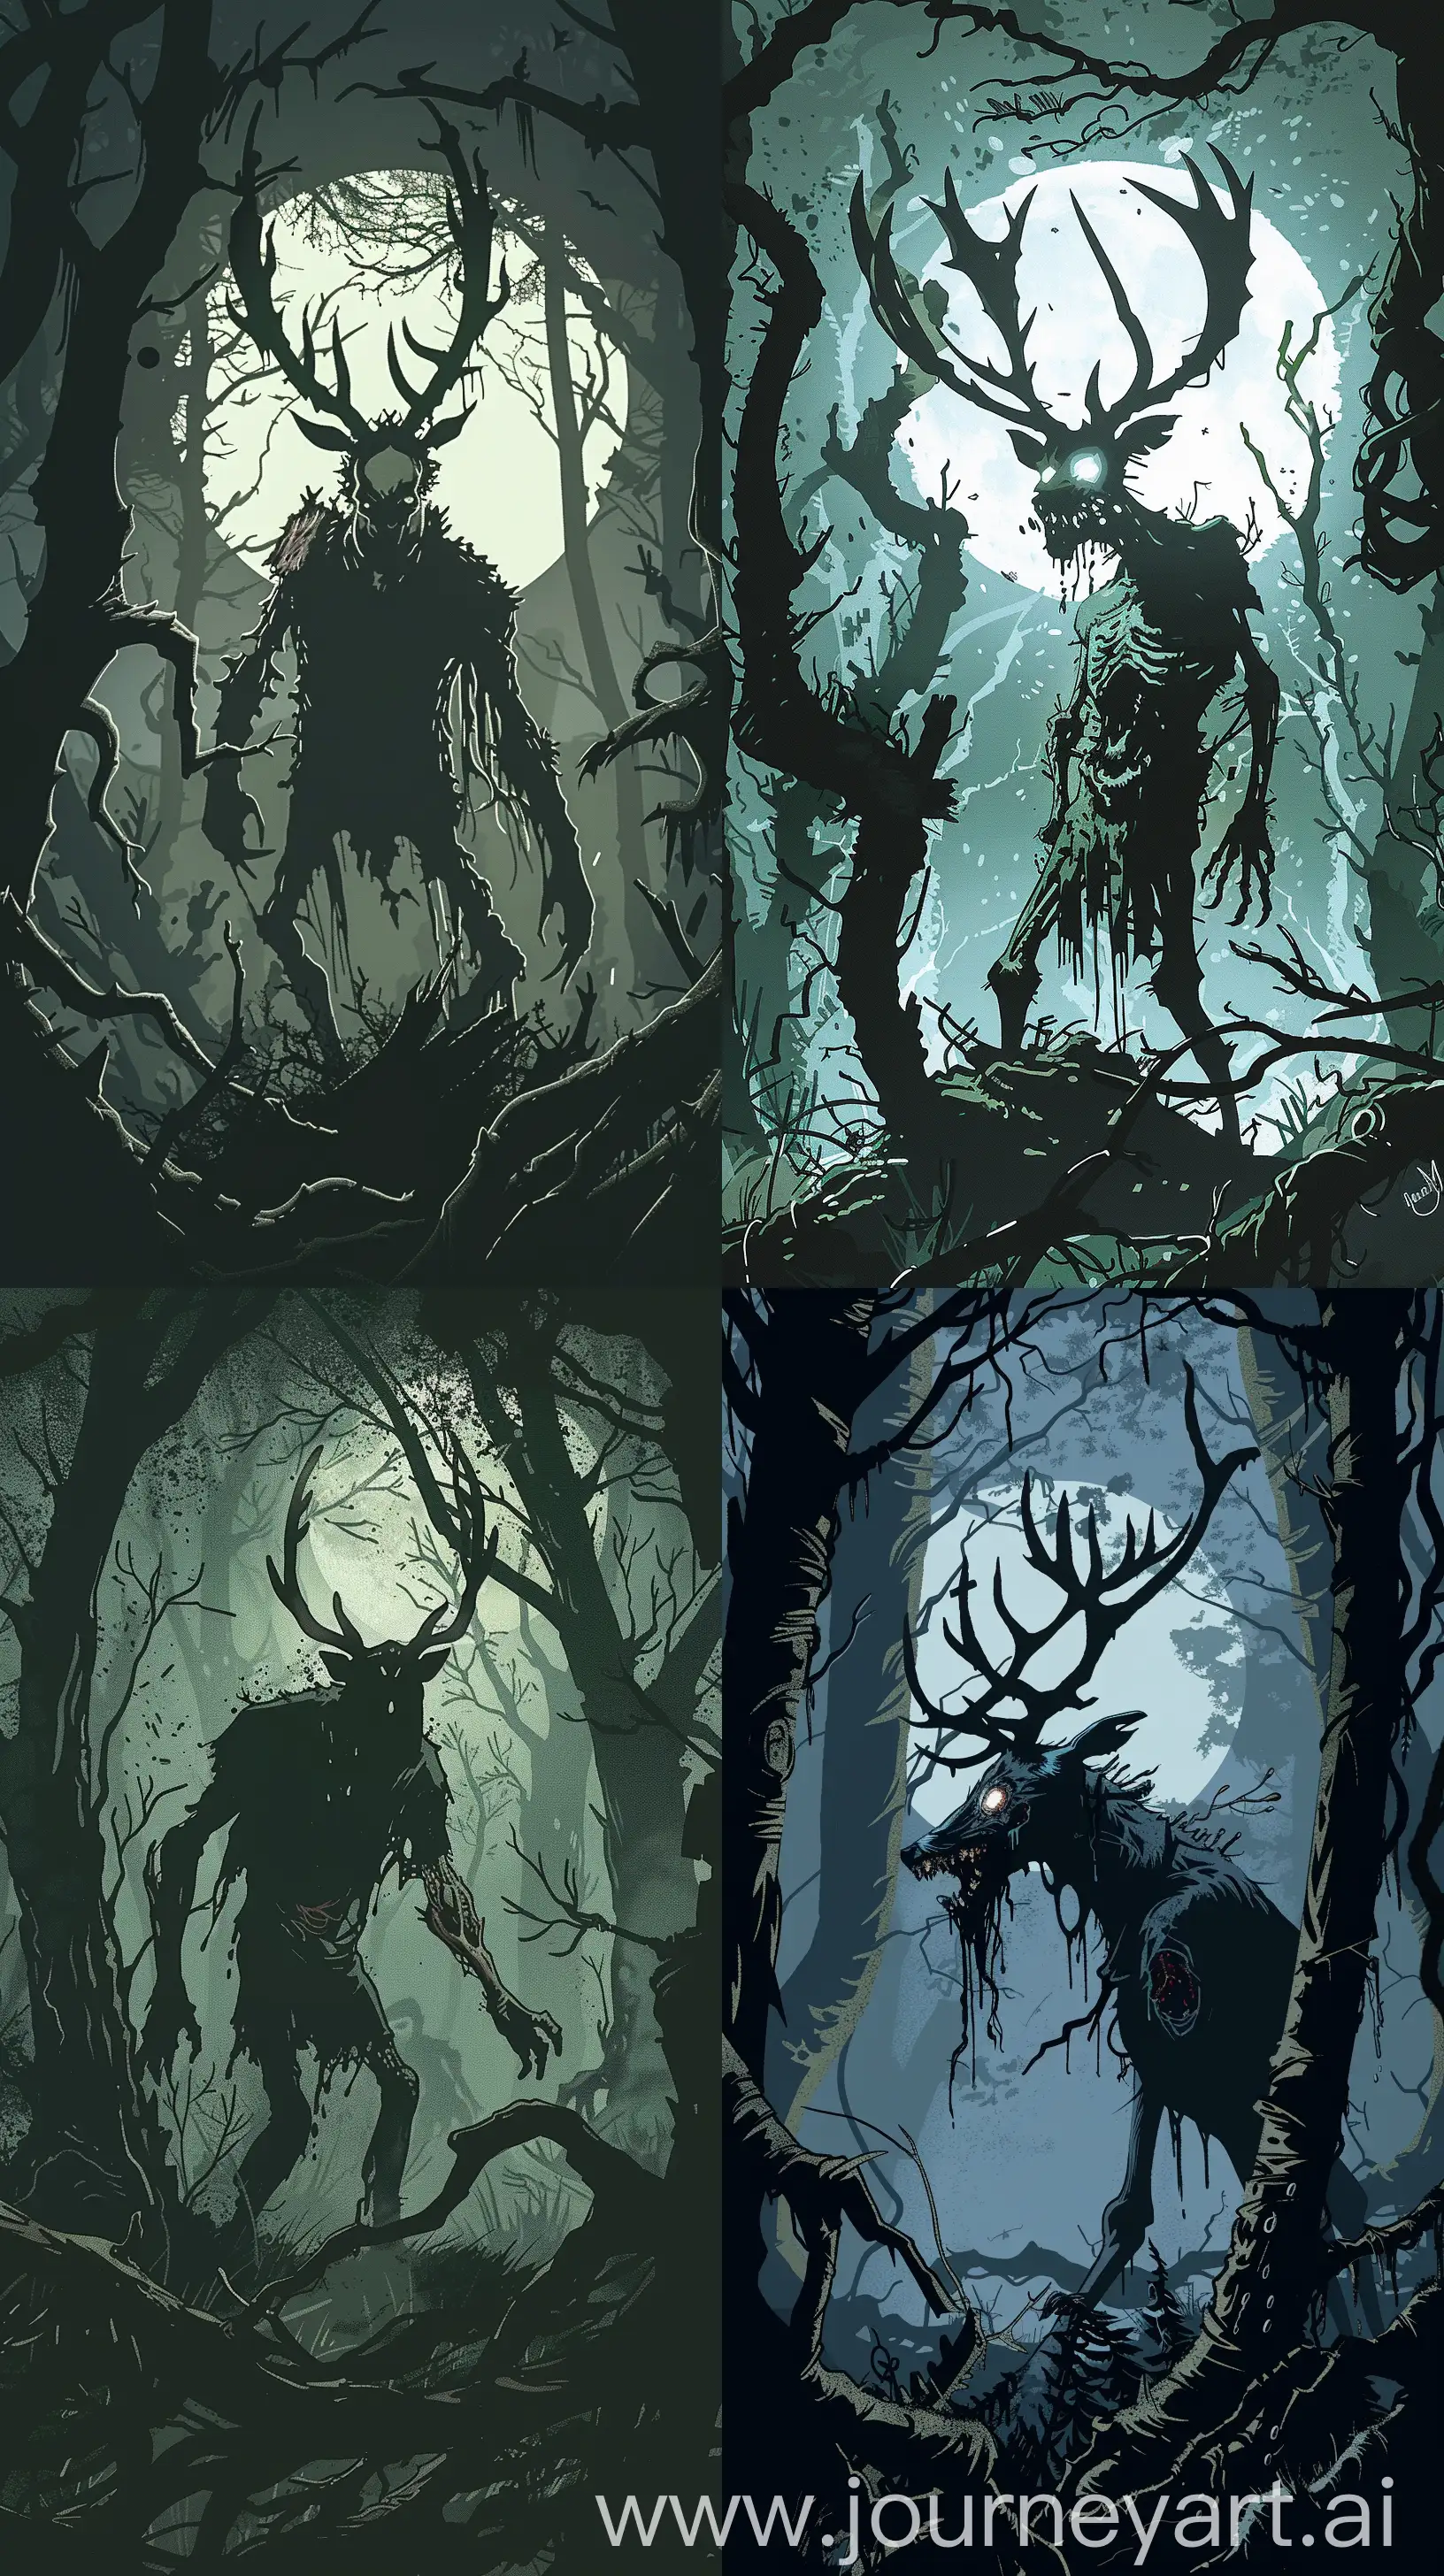 Create a chilling portrayal of a zombie deer man, half-decayed and antlered, lurking in the shadowy underbrush of a haunted forest. Mignola's style should emphasize the stark contrast between the creature's silhouette and the eerie moonlight filtering through the twisted trees, giving the creature an imposing and otherworldly appearance , --ar 9:16